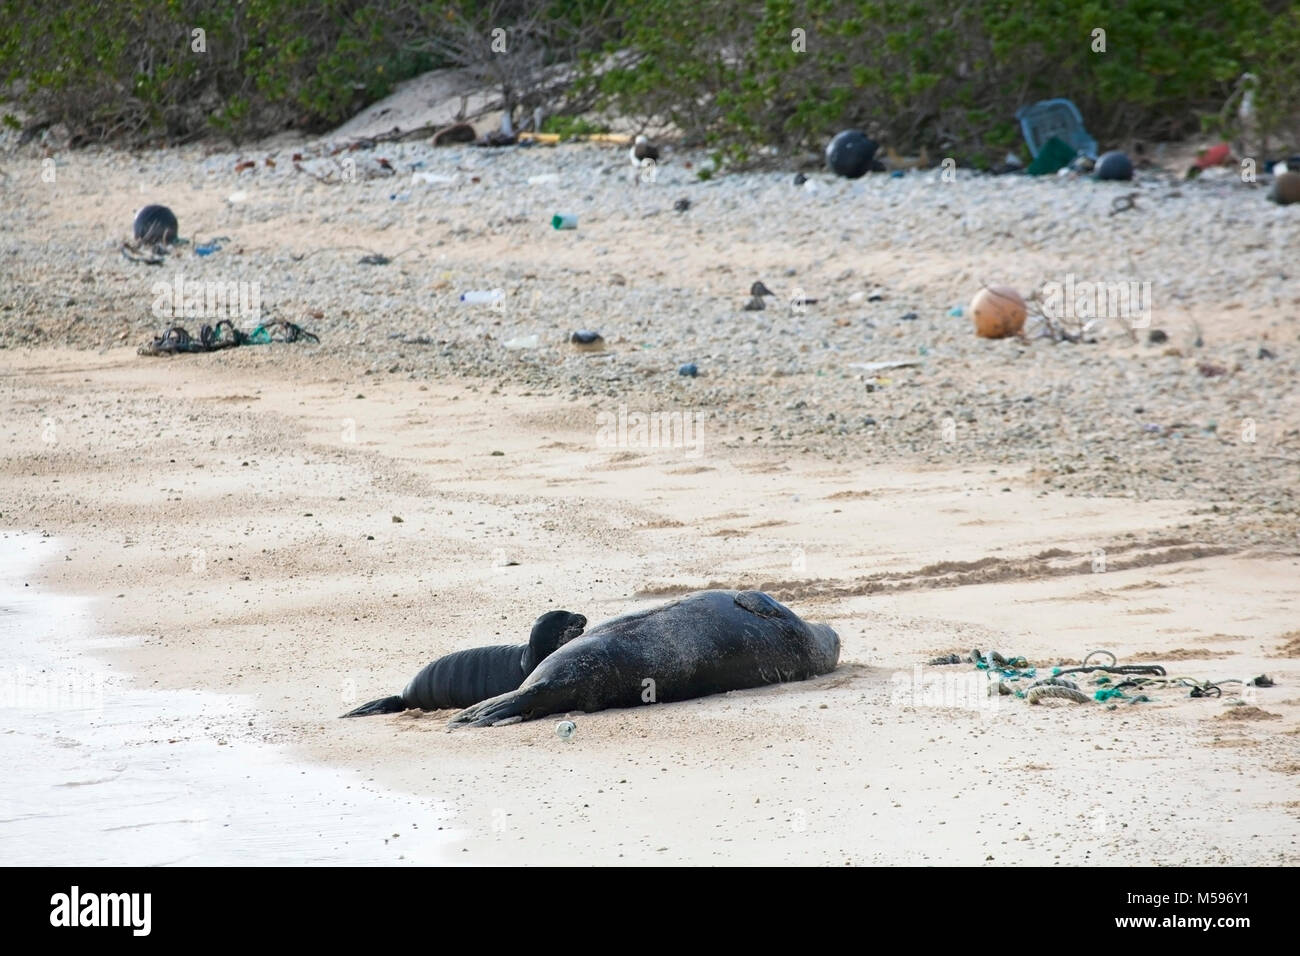 Hawaiian Monk Seal (Neomonachus schauinslandi) mother and  baby on North Pacific island with marine debris including ropes and plastic washed ashore Stock Photo